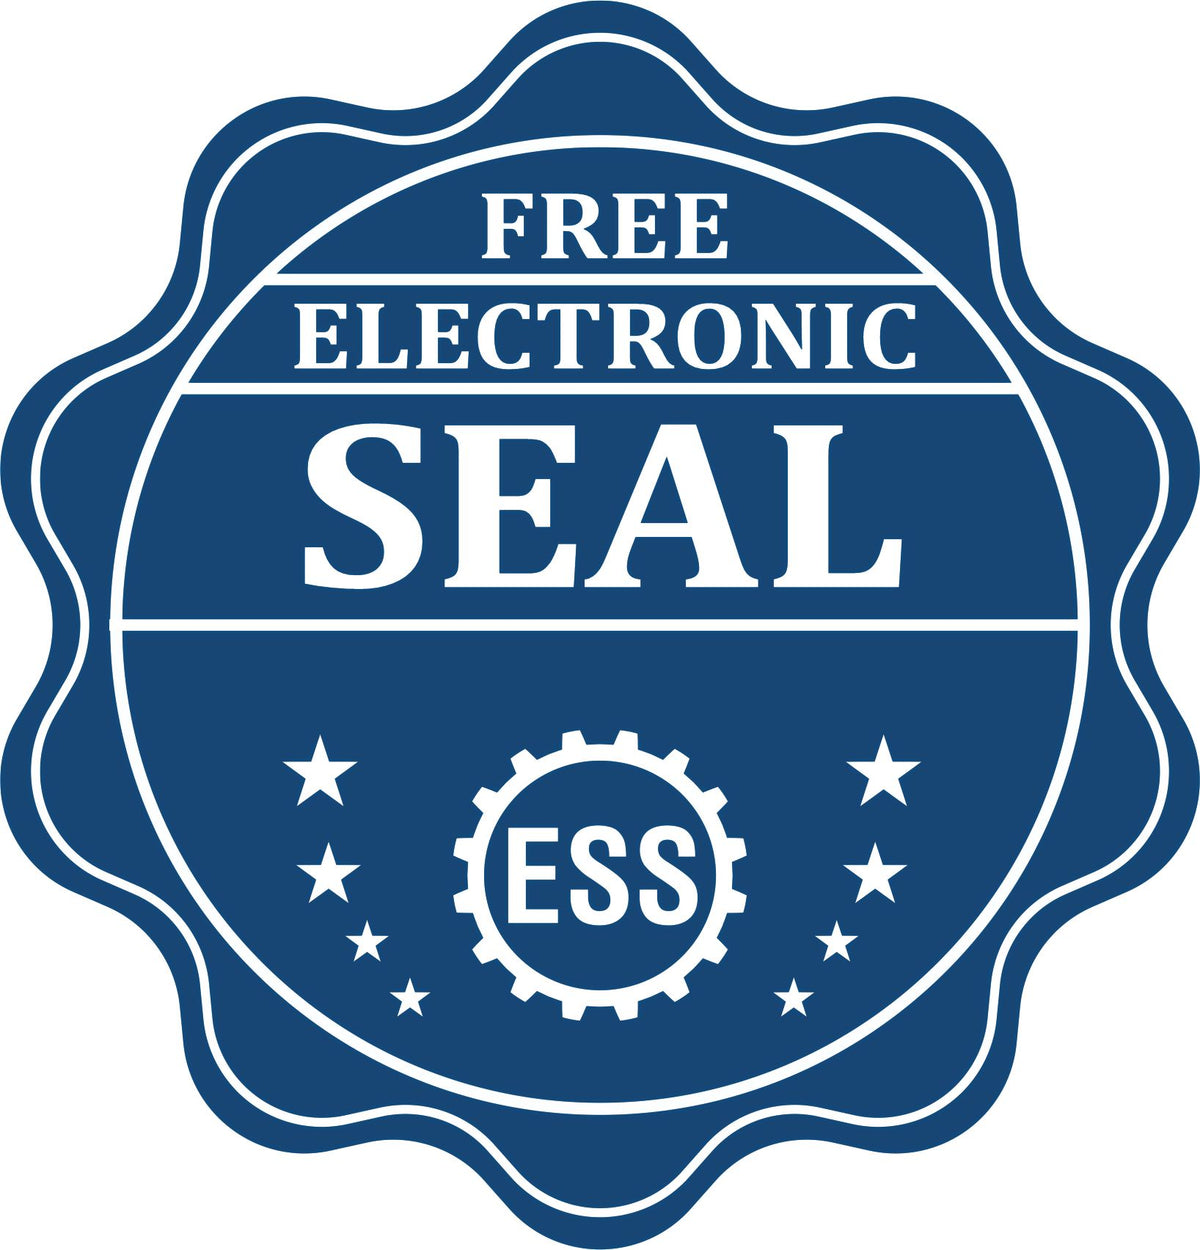 A badge showing a free electronic seal for the State of Vermont Long Reach Architectural Embossing Seal with stars and the ESS gear on the emblem.